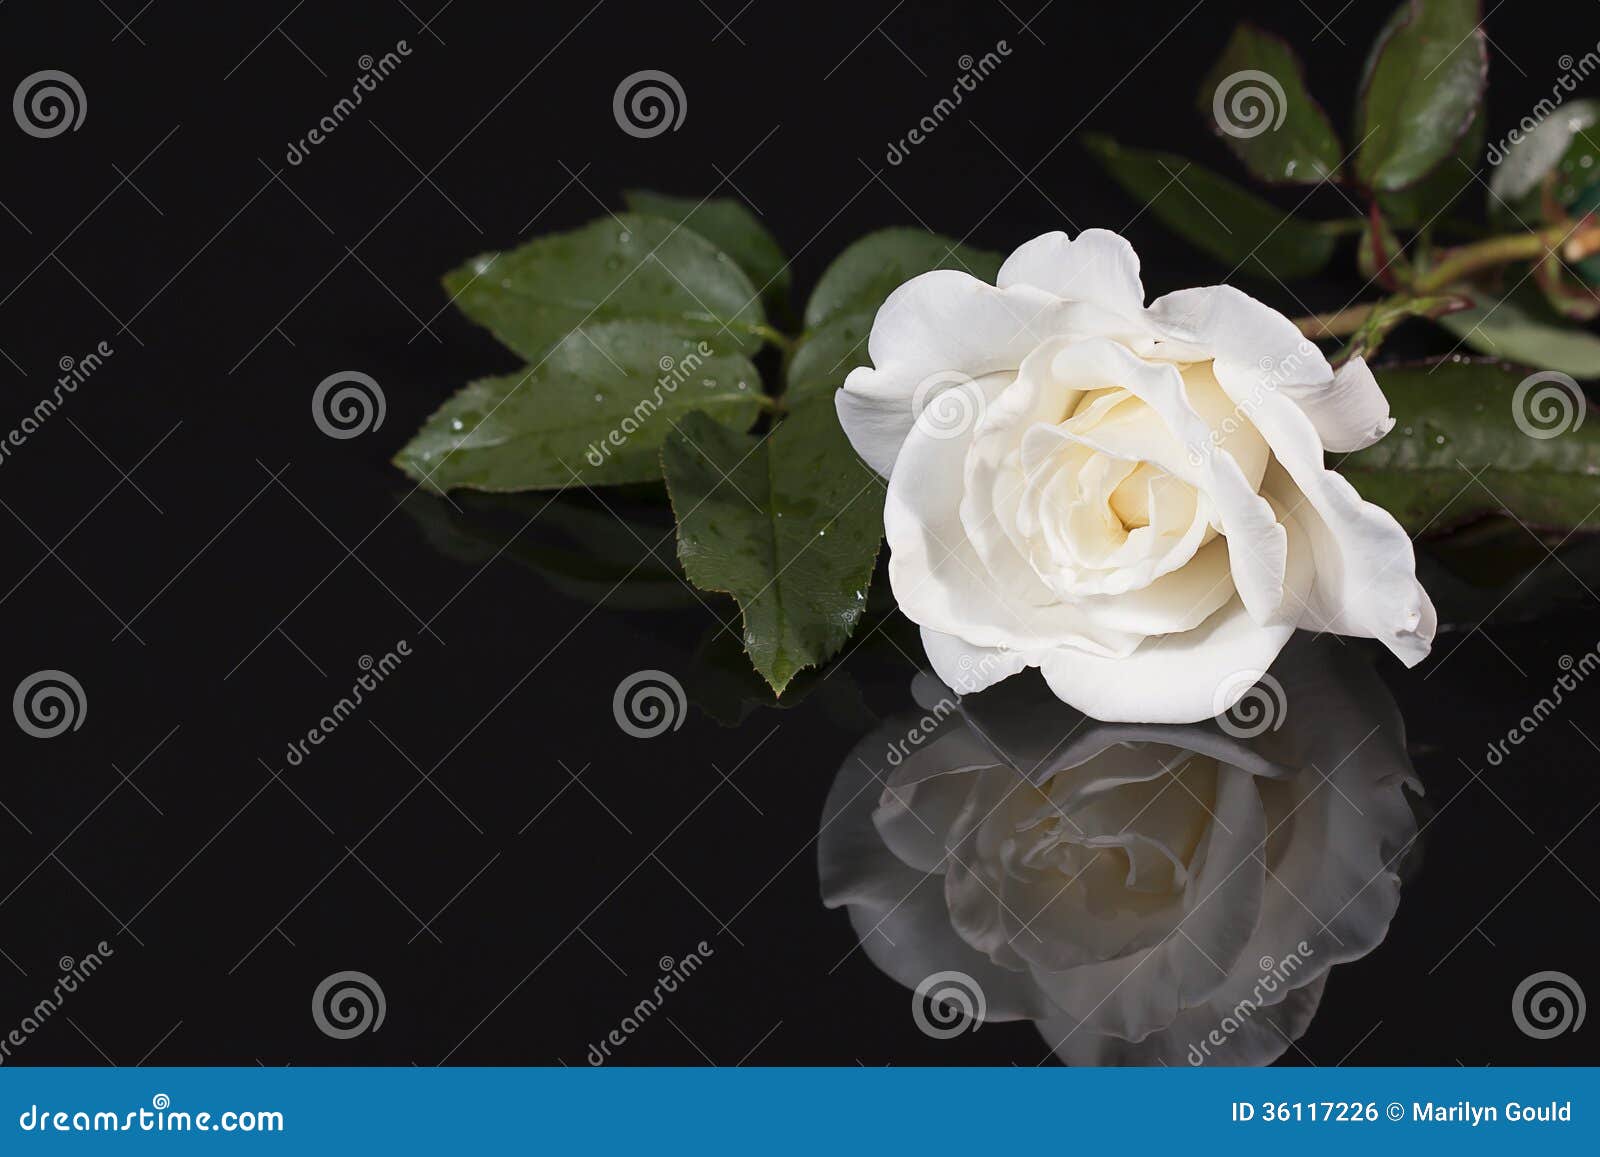 white rose with reflection